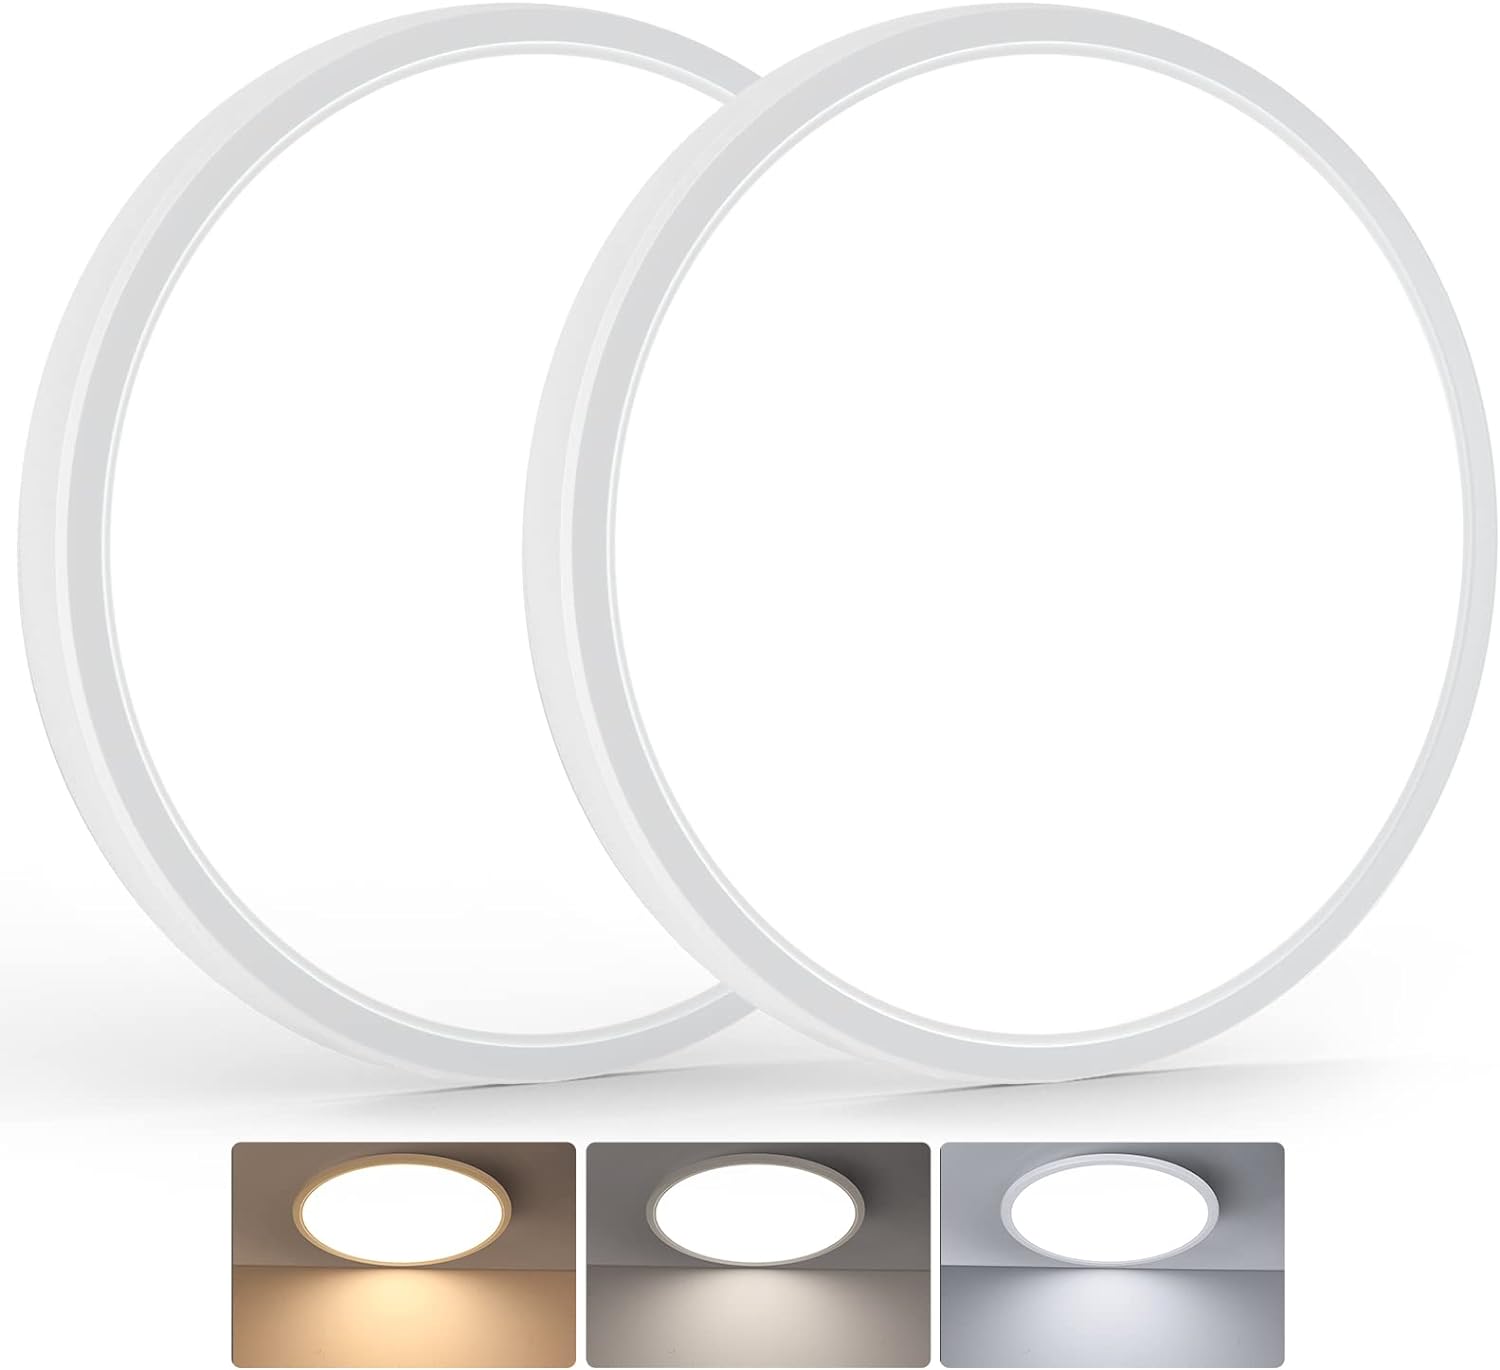 BrightHome LED Flush Mount Ceiling Light Fixtures Review